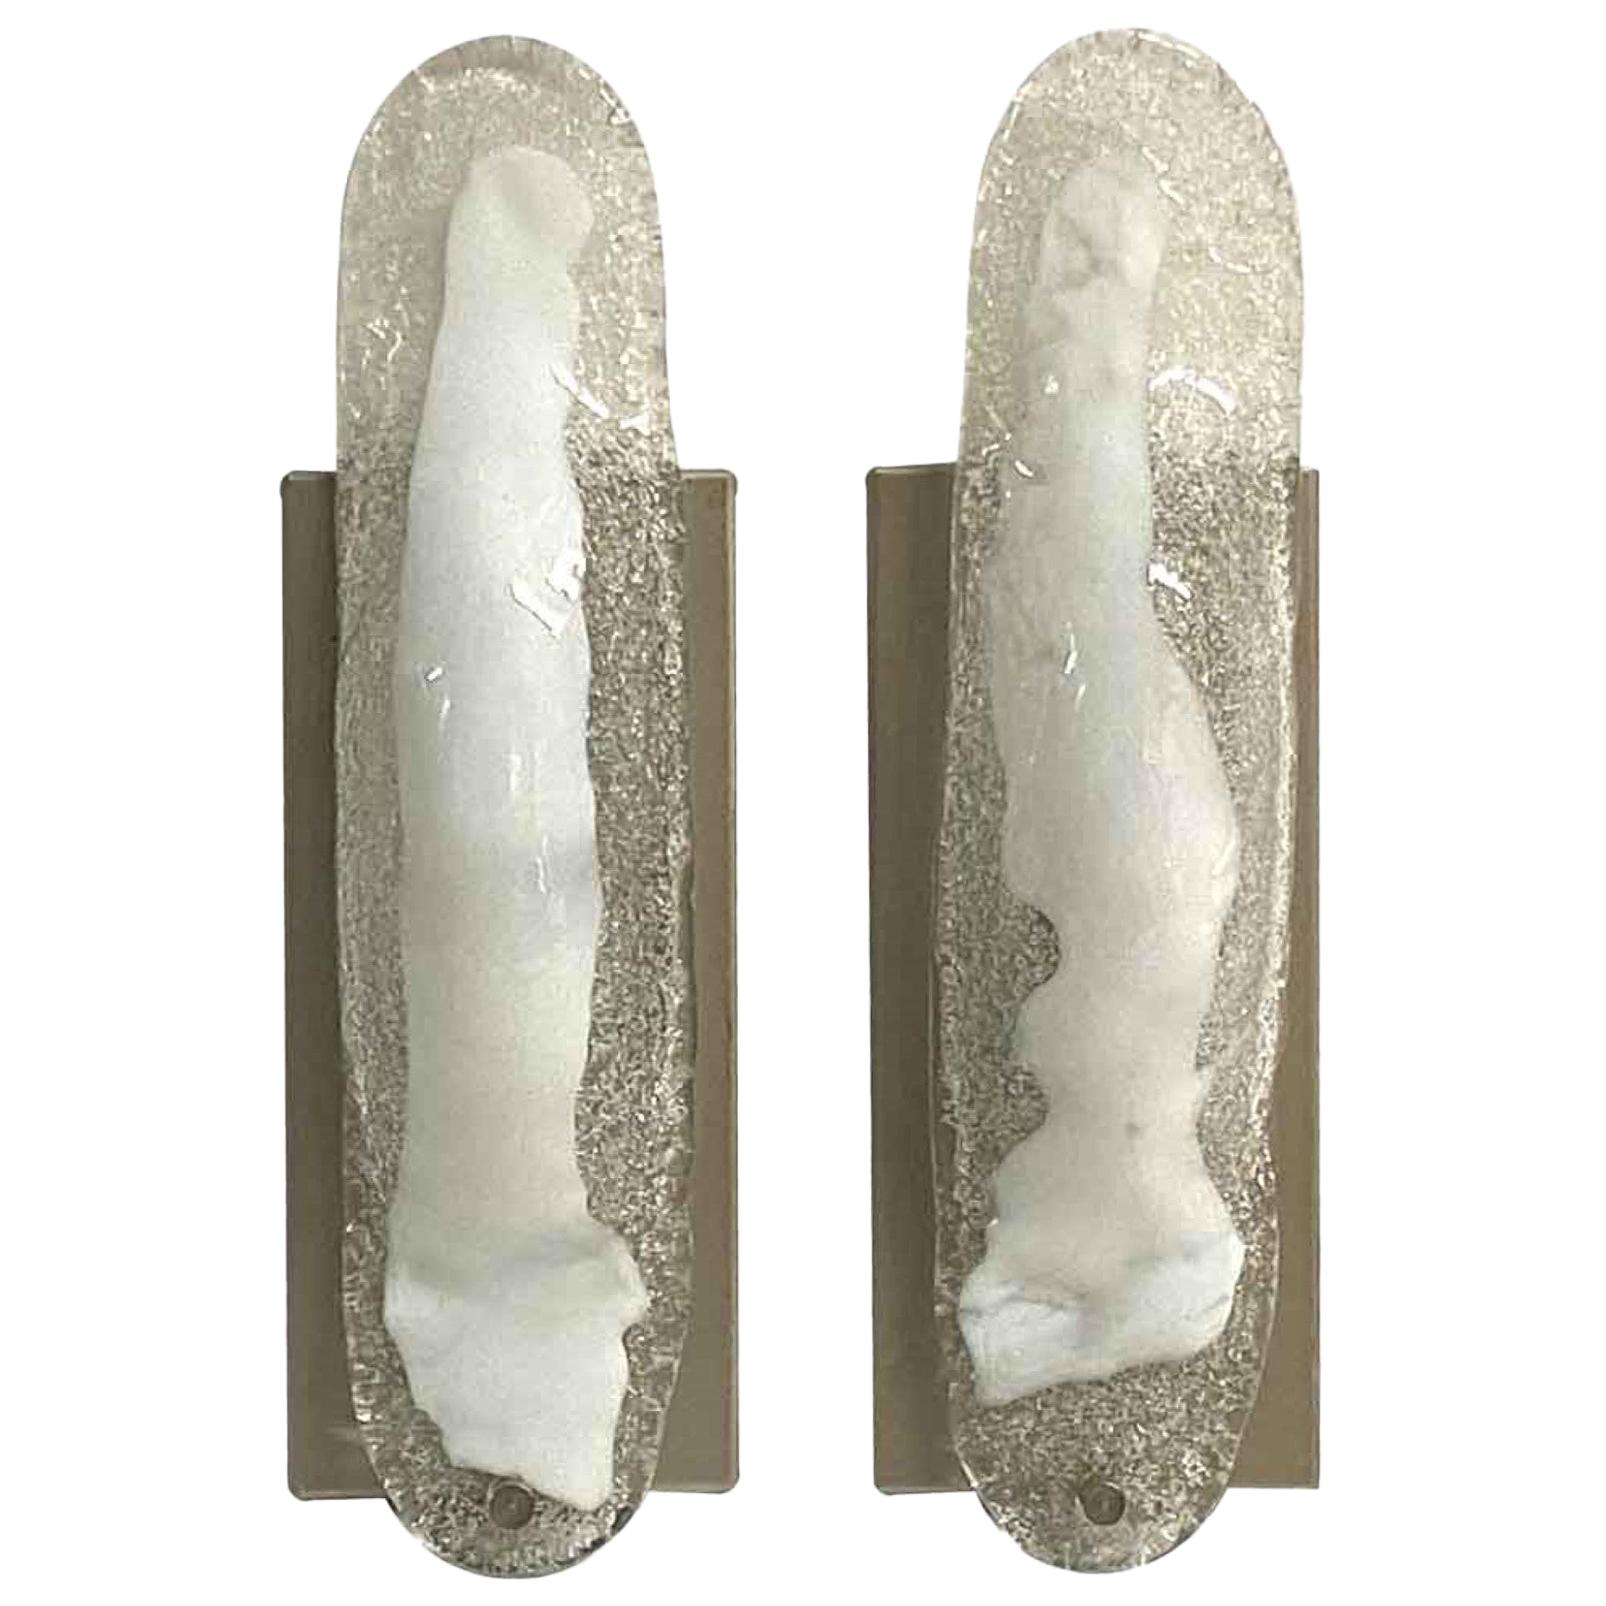 1980s Pair of Clear and White Blown Glass Wall Sconces Mid-Century Modern Murano